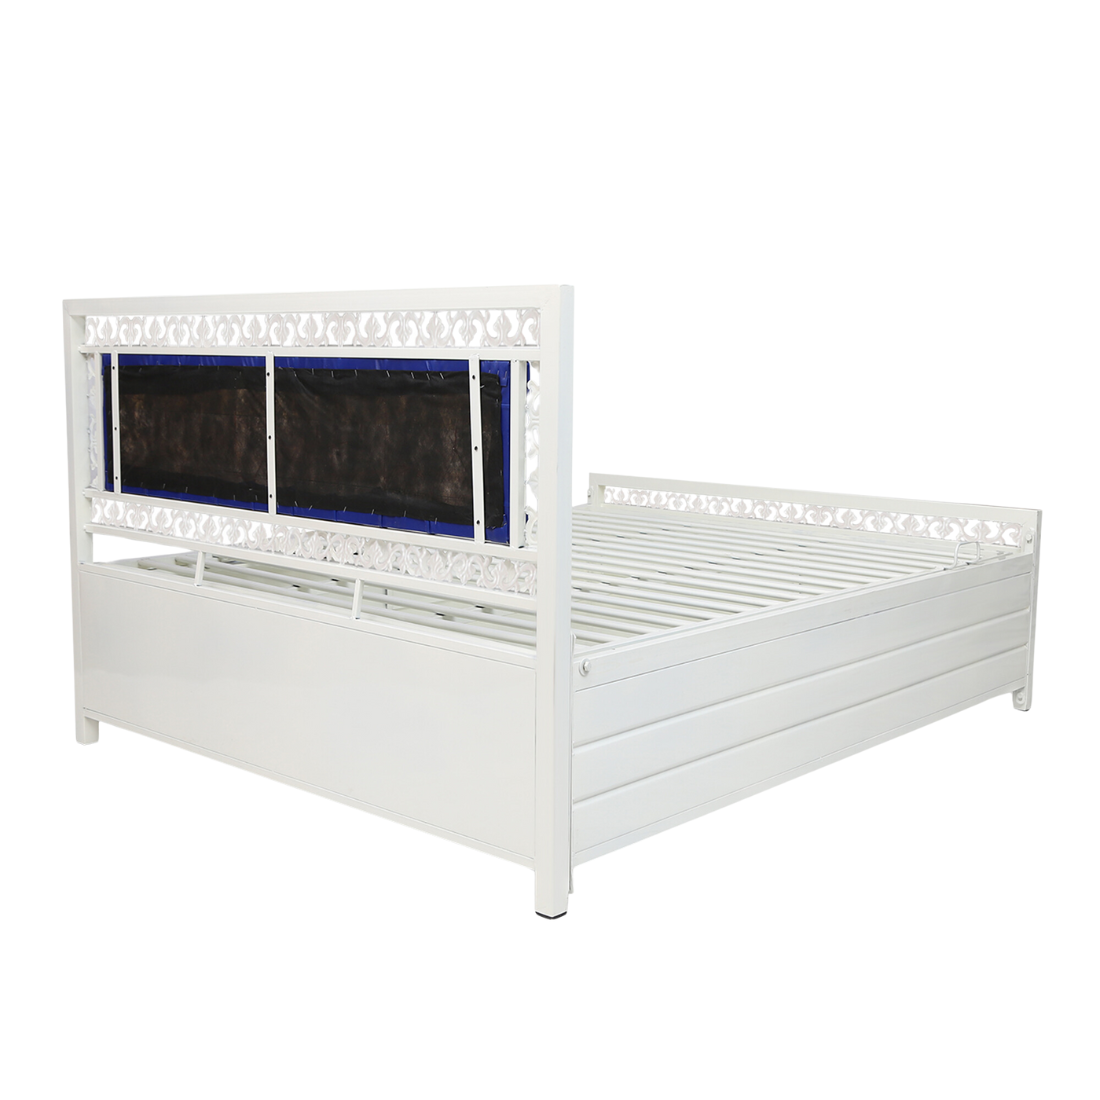 Cuba Hydraulic Storage King Metal Bed with Blue Cushion Headrest (Color - White)